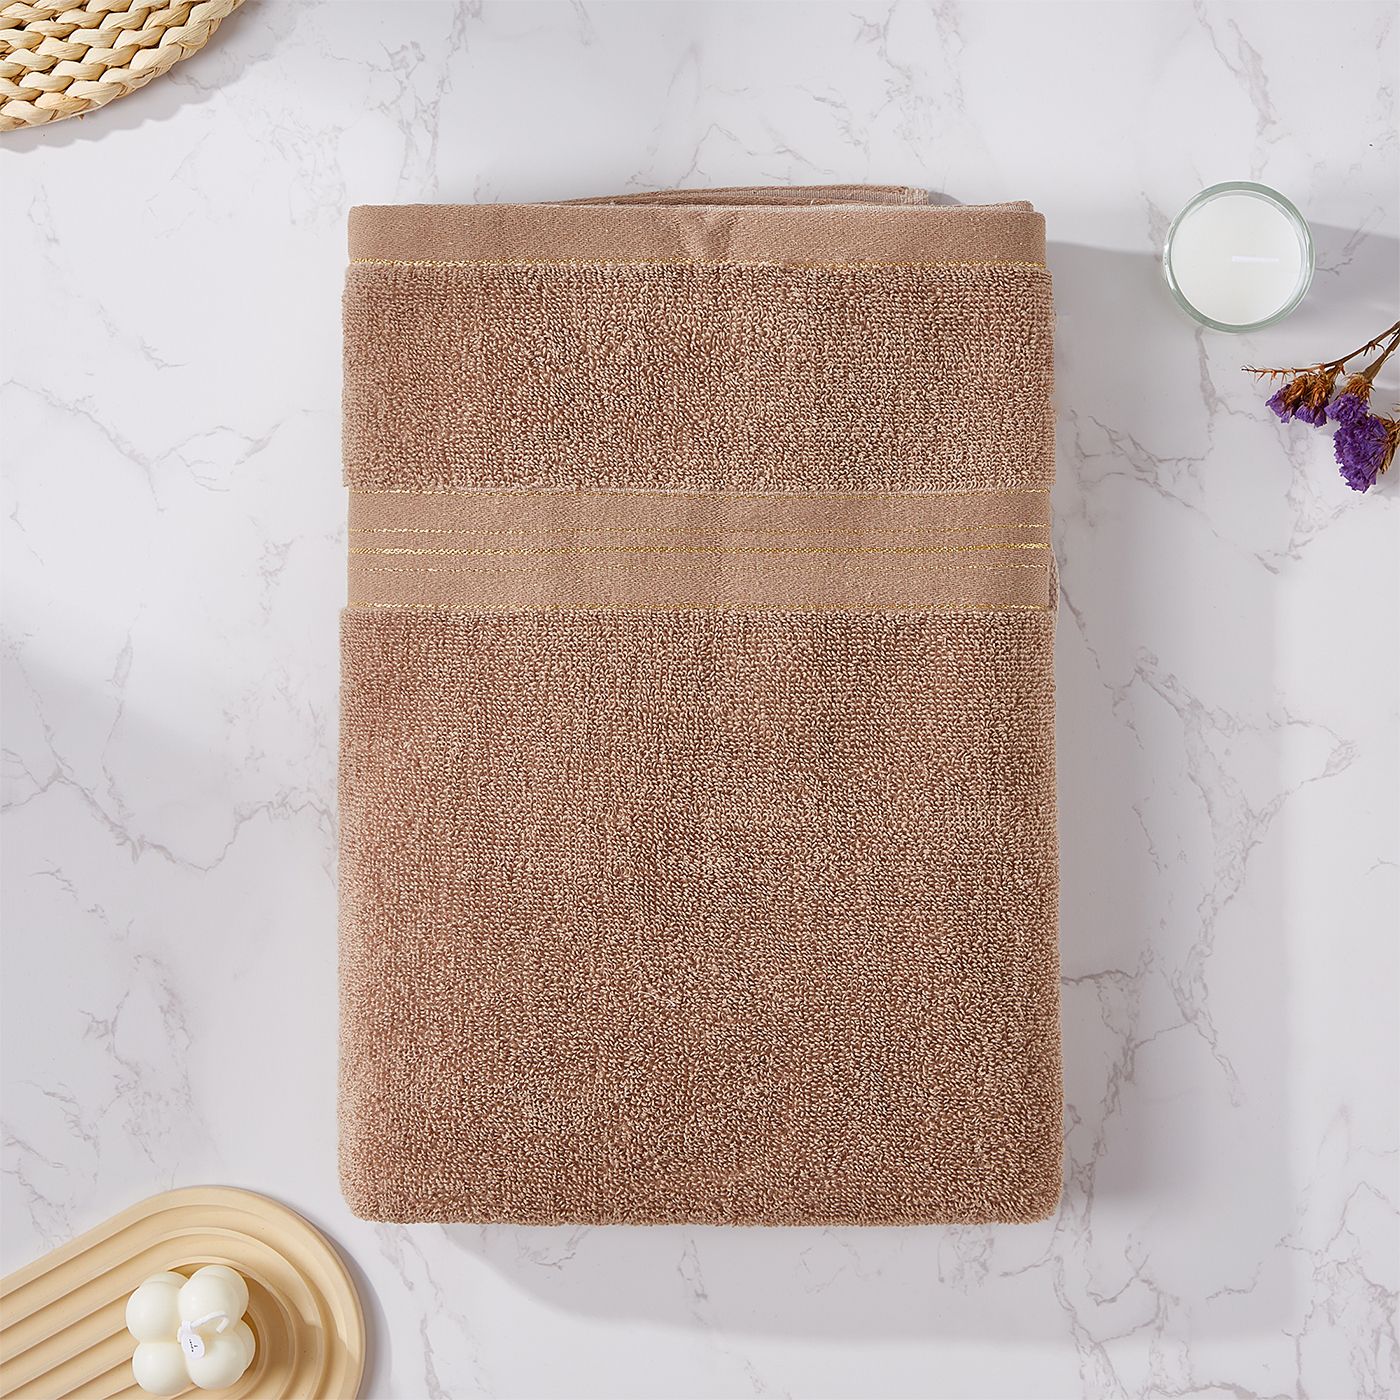 Soft Cotton Bath Towel - Perfect For Home, Beach, And Hotel Use